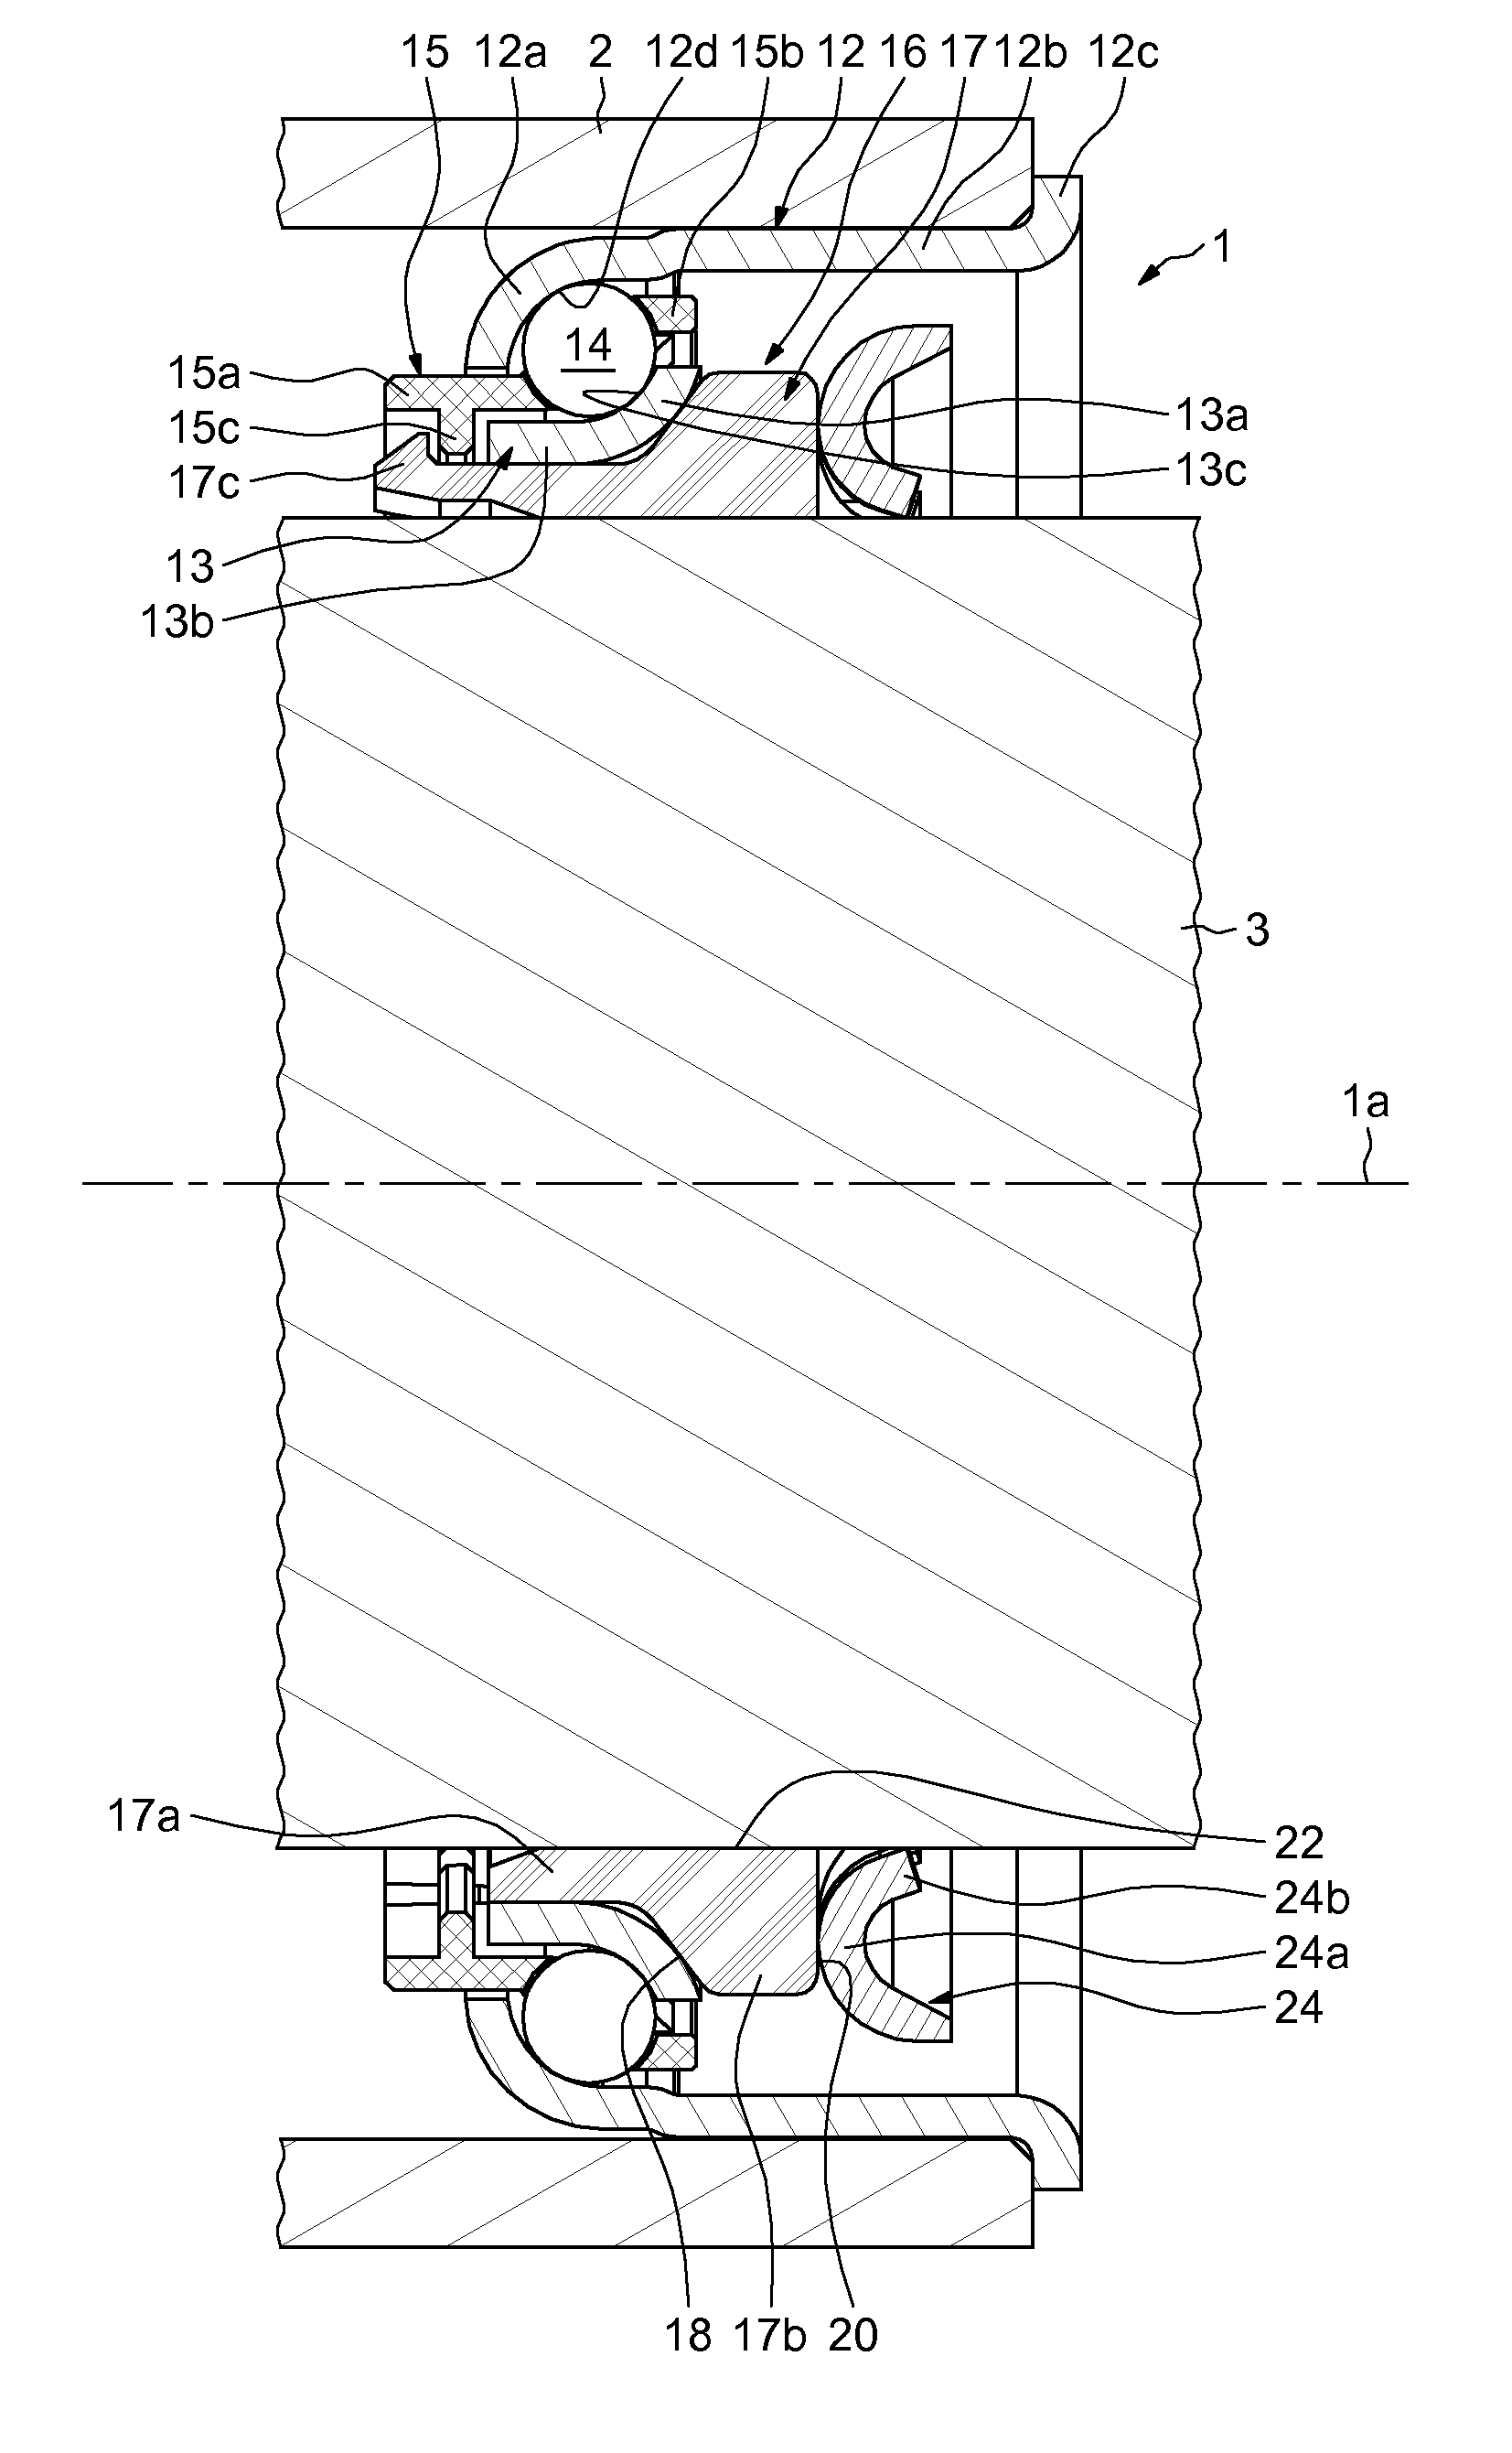 Rolling bearing device, in particular for a steering column